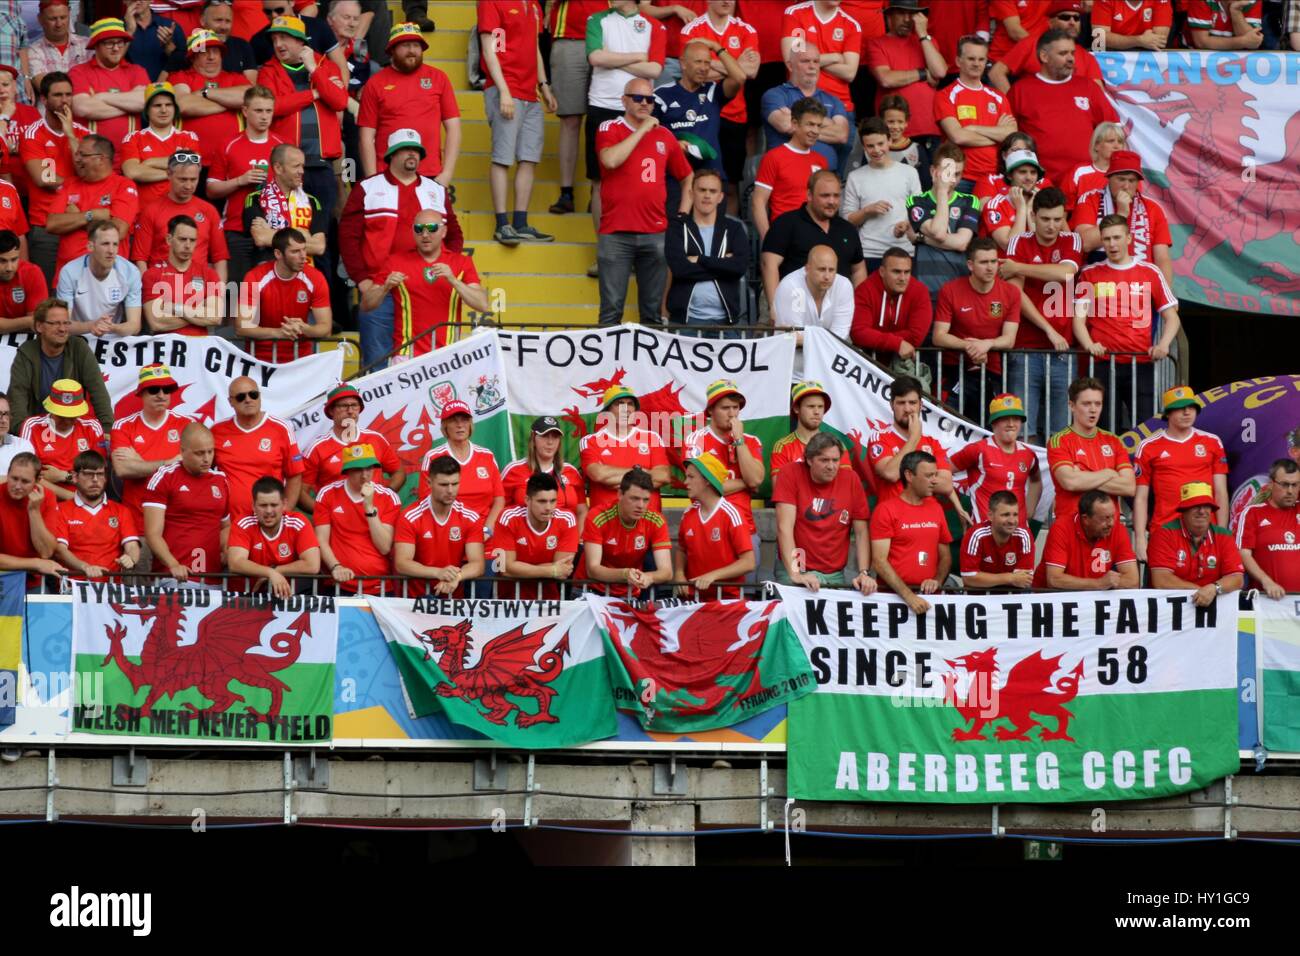 WALES FANS IN THE STADIUM ENGLAND V WALES STADE FELIX BOLLAERT-DELELIS LENS FRANCE 16 June 2016 Stock Photo